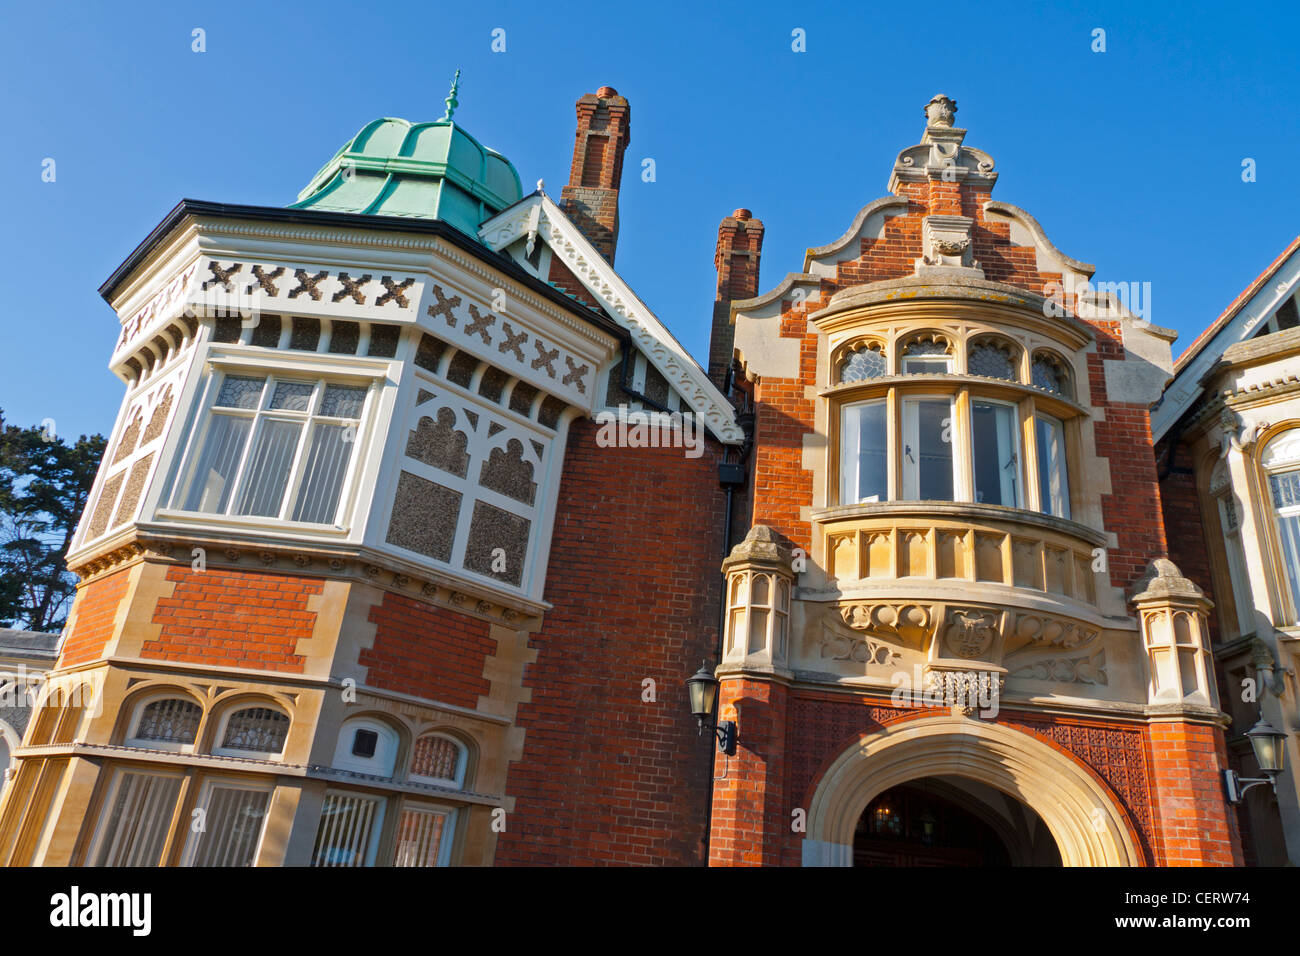 The facade of Bletchley Park Mansion in Buckinghamshire, England. The home of British code breakers during World War Two. Stock Photo